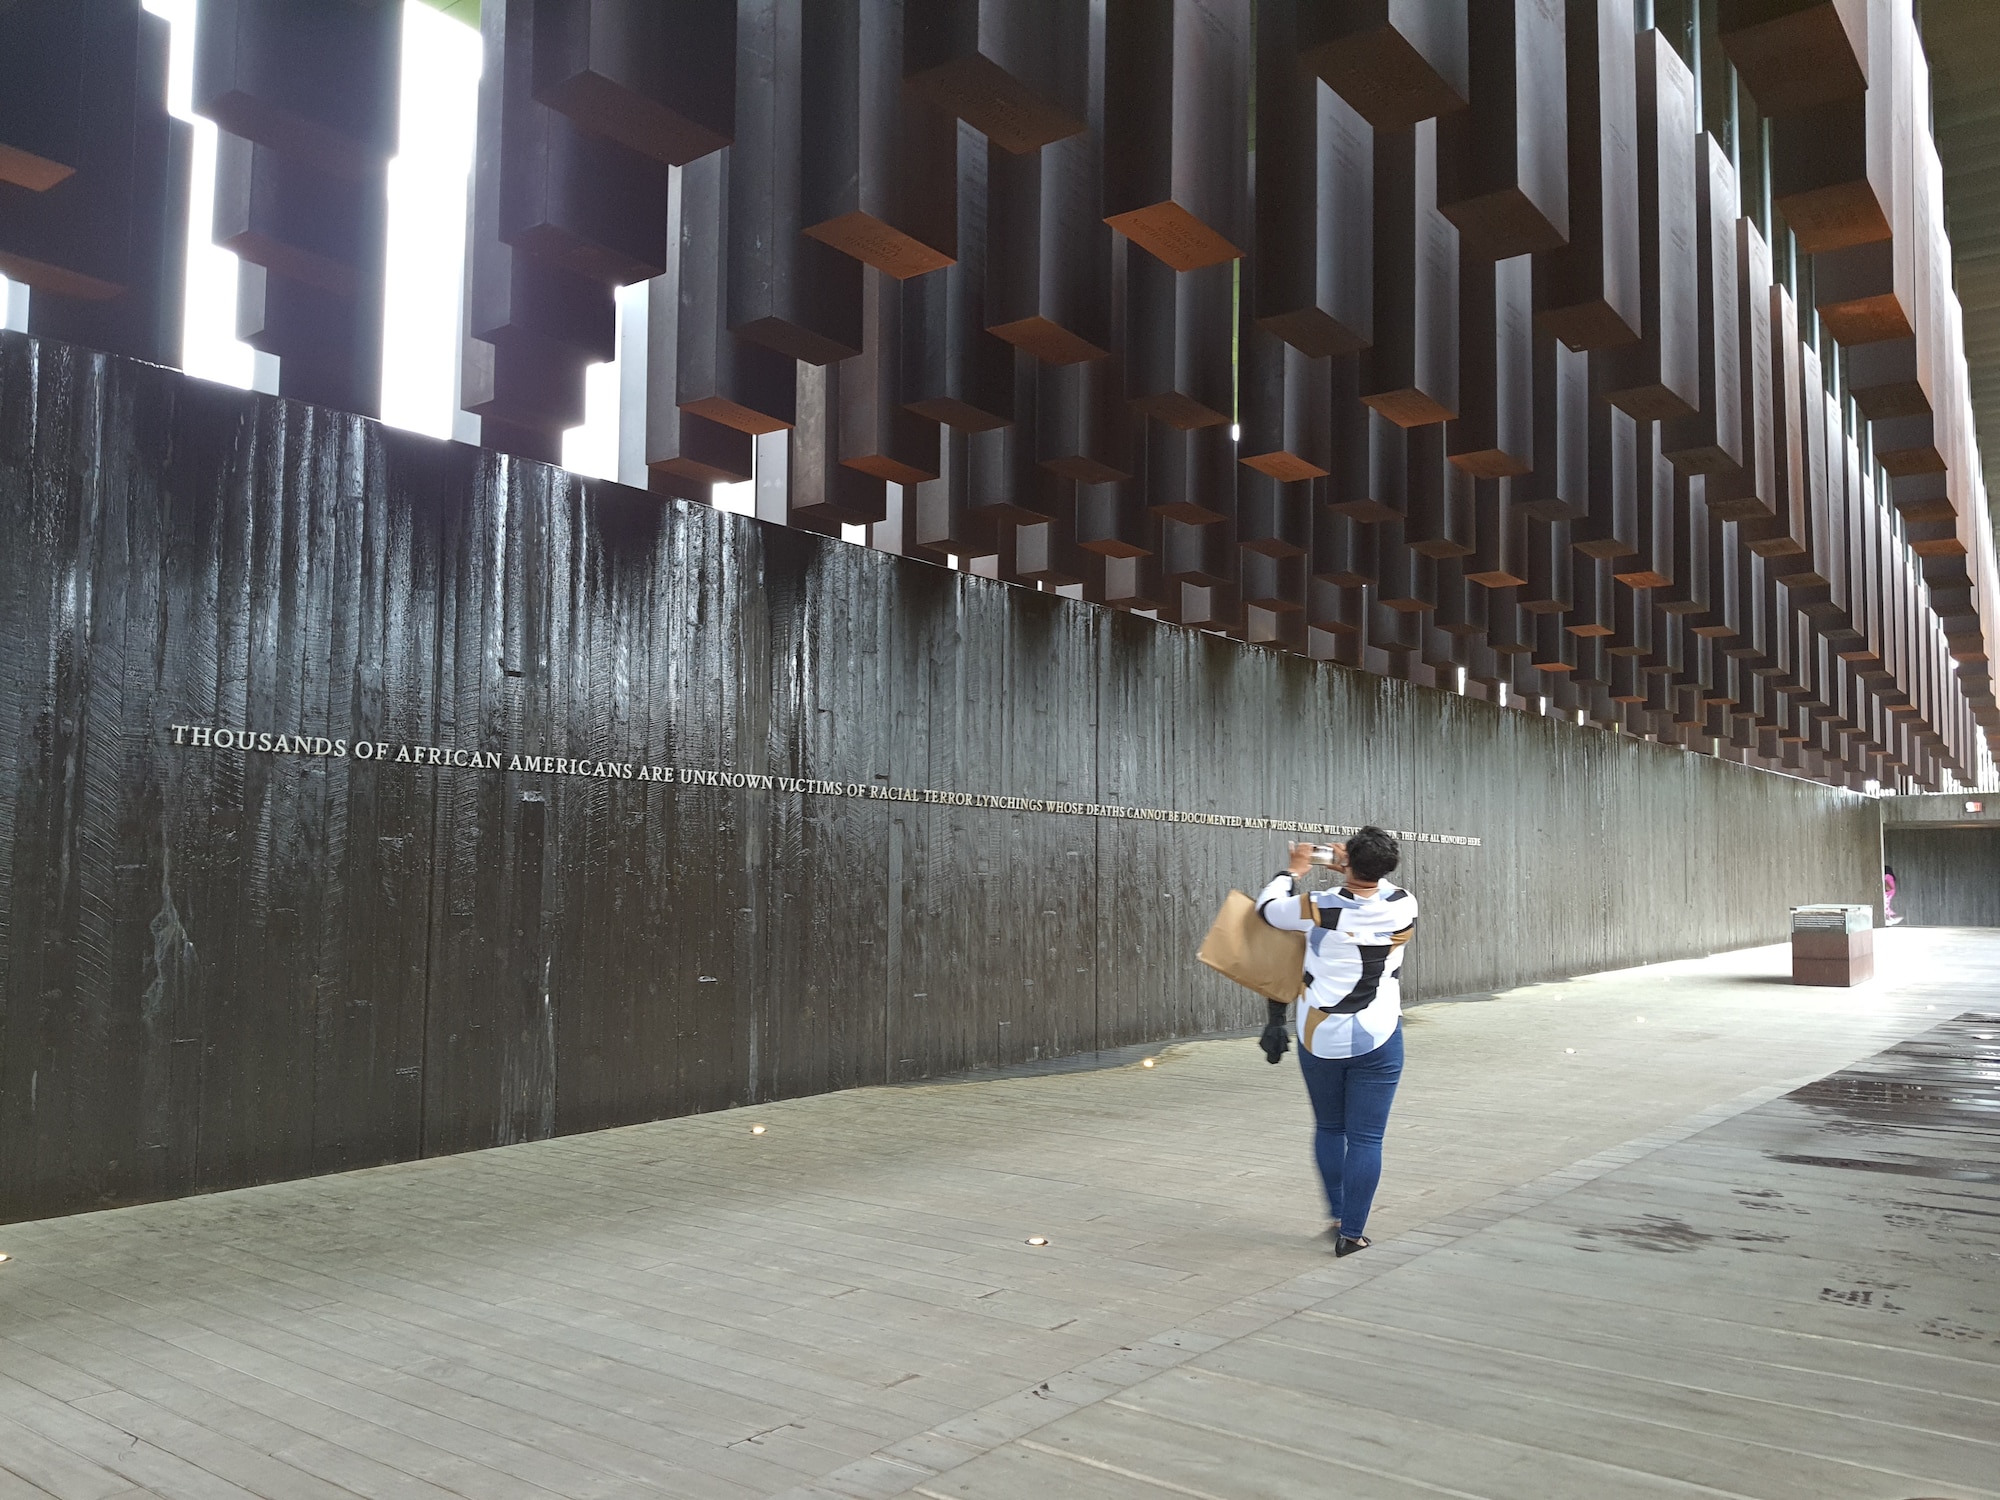 Senior Master Sgt. Tonya Taplin, 403rd Logistics Readiness Squadron plans superintendent, takes a photo of a quote on the wall of the National Memorial for Peace and Justice while walking below the six-foot tall steel columns which hung suspended overhead, each marked with a county, state, and the lynching victims' names, April 9, 2021 during the 403rd Mission Support Group leadership staff ride. Members of the 403rd MSG leadership participated in a non-traditional staff ride, which involves walking a battlefield, only in this case the battle that was fought was the Civil Rights Movement for African Americans in Montgomery, Alabama. The staff ride was intended to provide the leadership team with a better posture in order to have the tough conversations with their Airmen when it comes time to discuss diversity and inclusion and why it plays a vital role in combat readiness. (U.S. Air Force photo by Jessica L. Kendziorek)